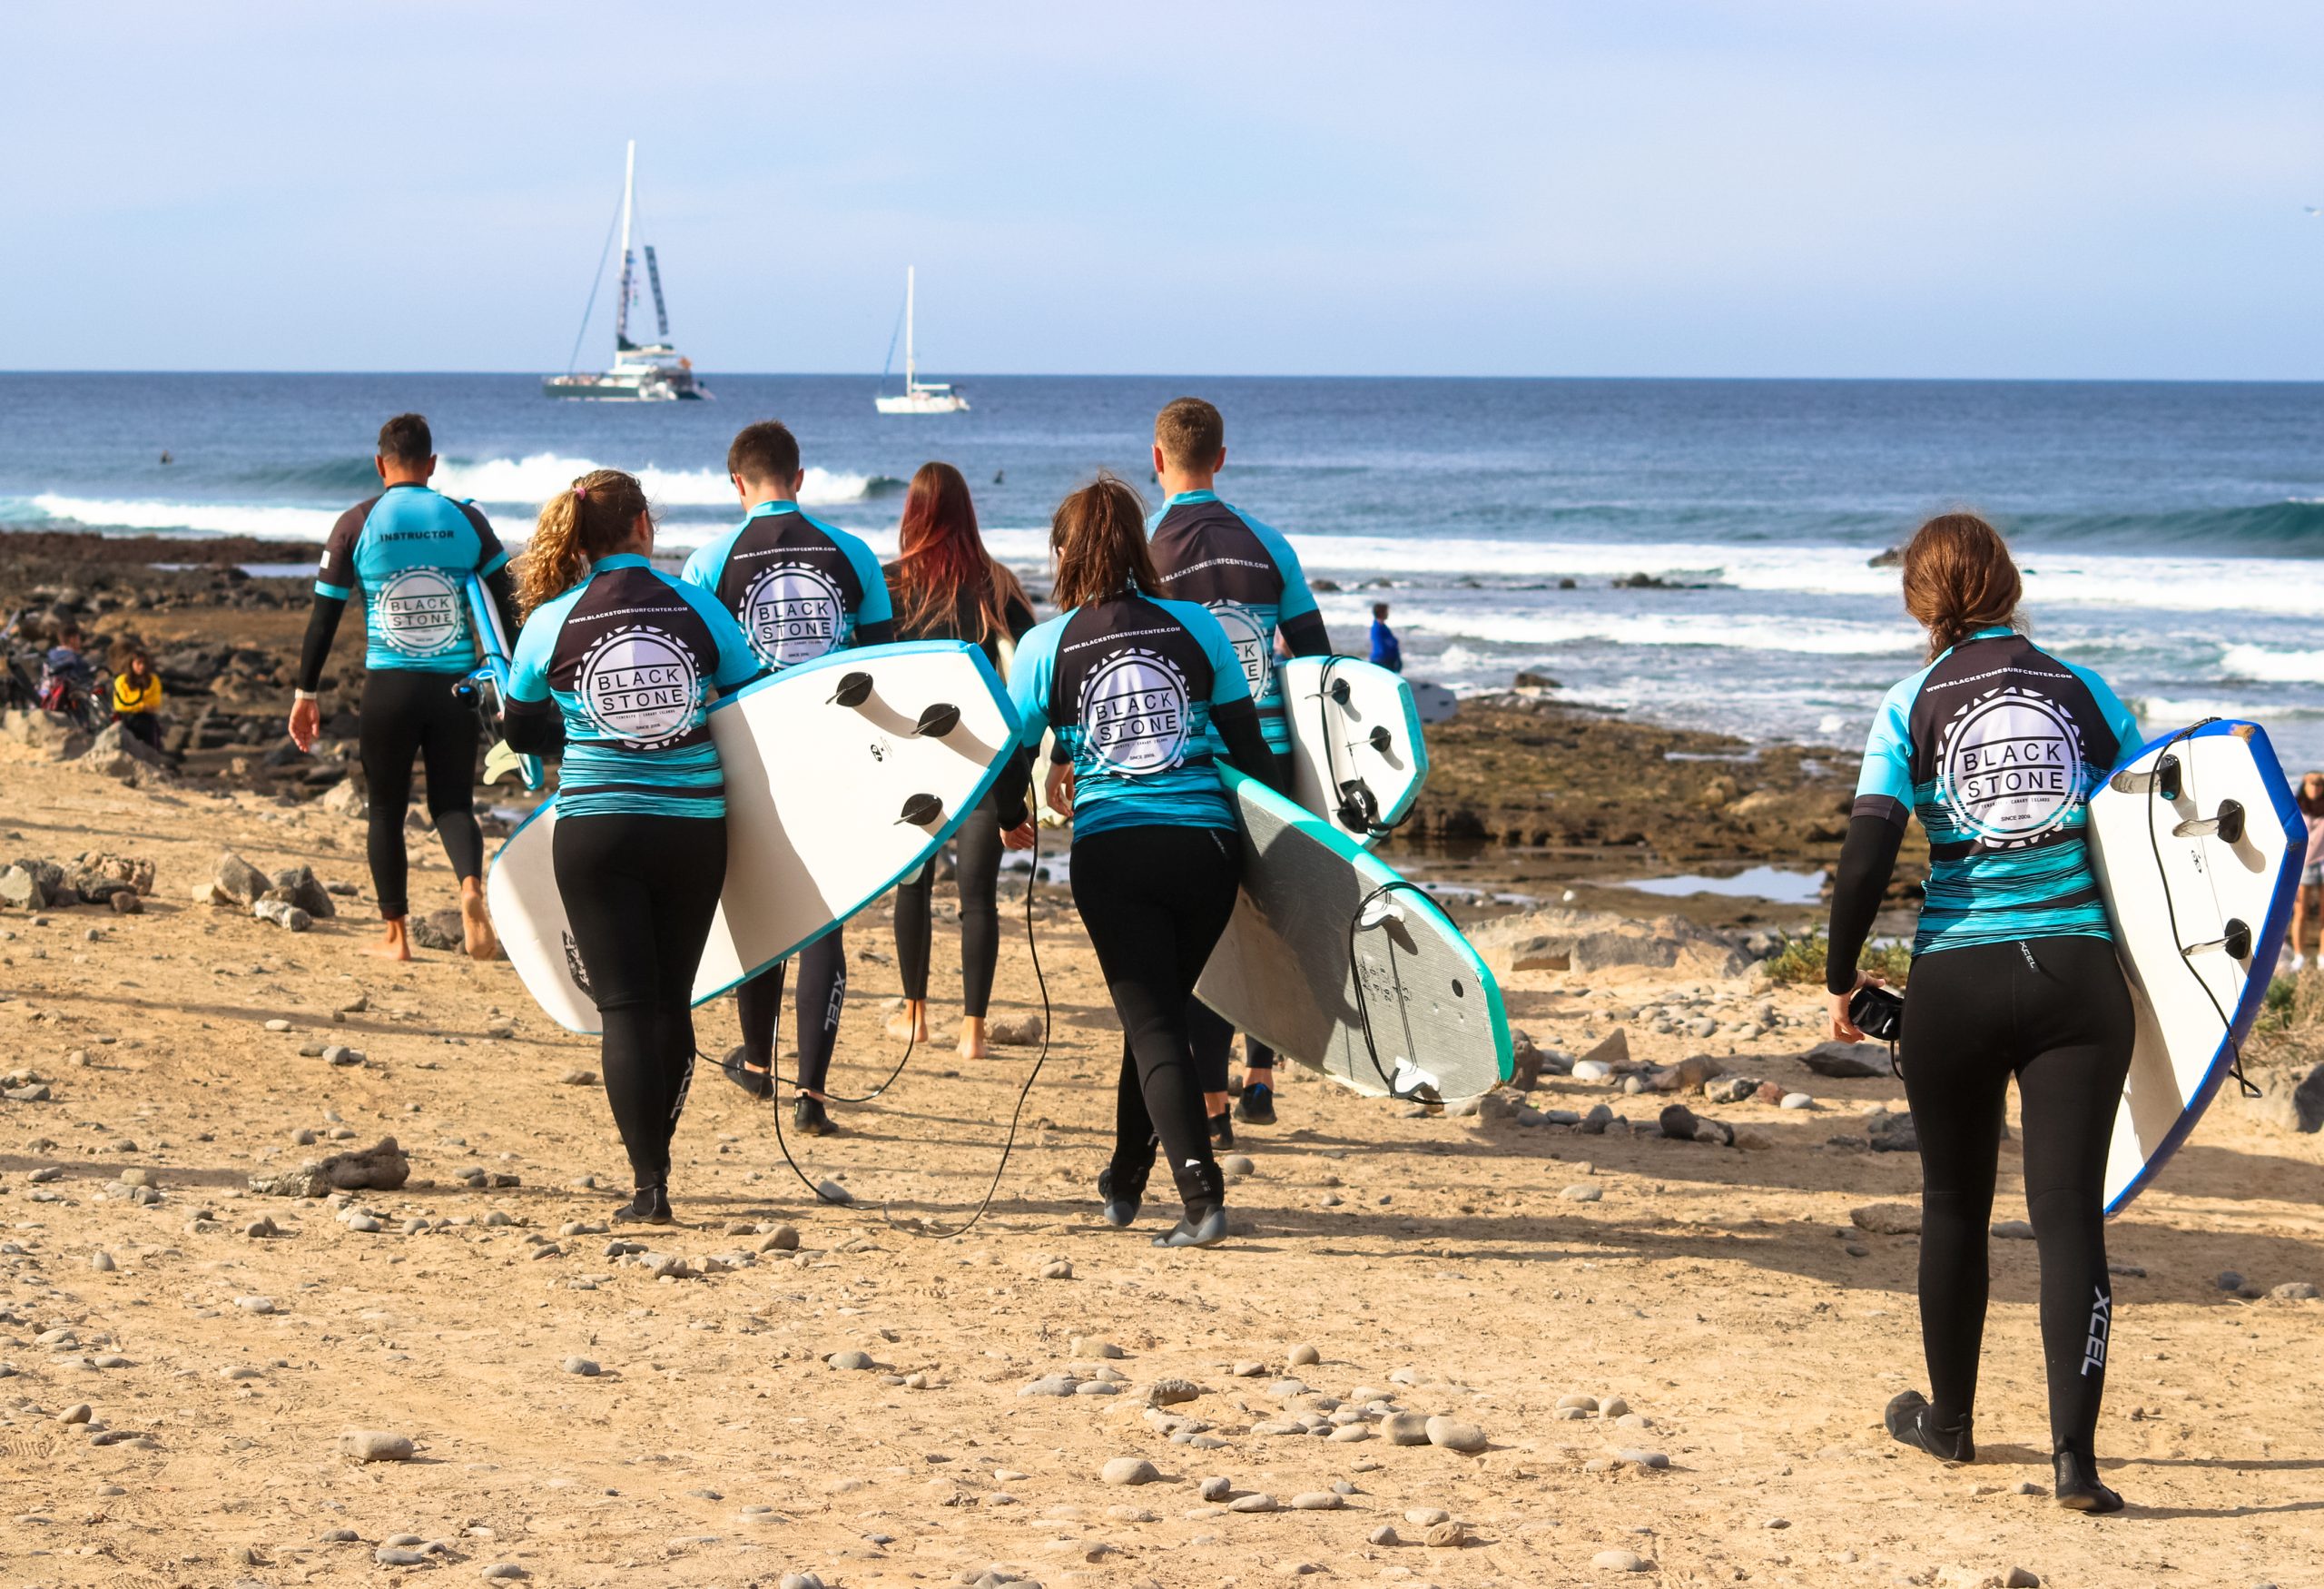 Blackstone Surf Center students with surf equipment in Playa las Américas in Tenerife during a surf lesson